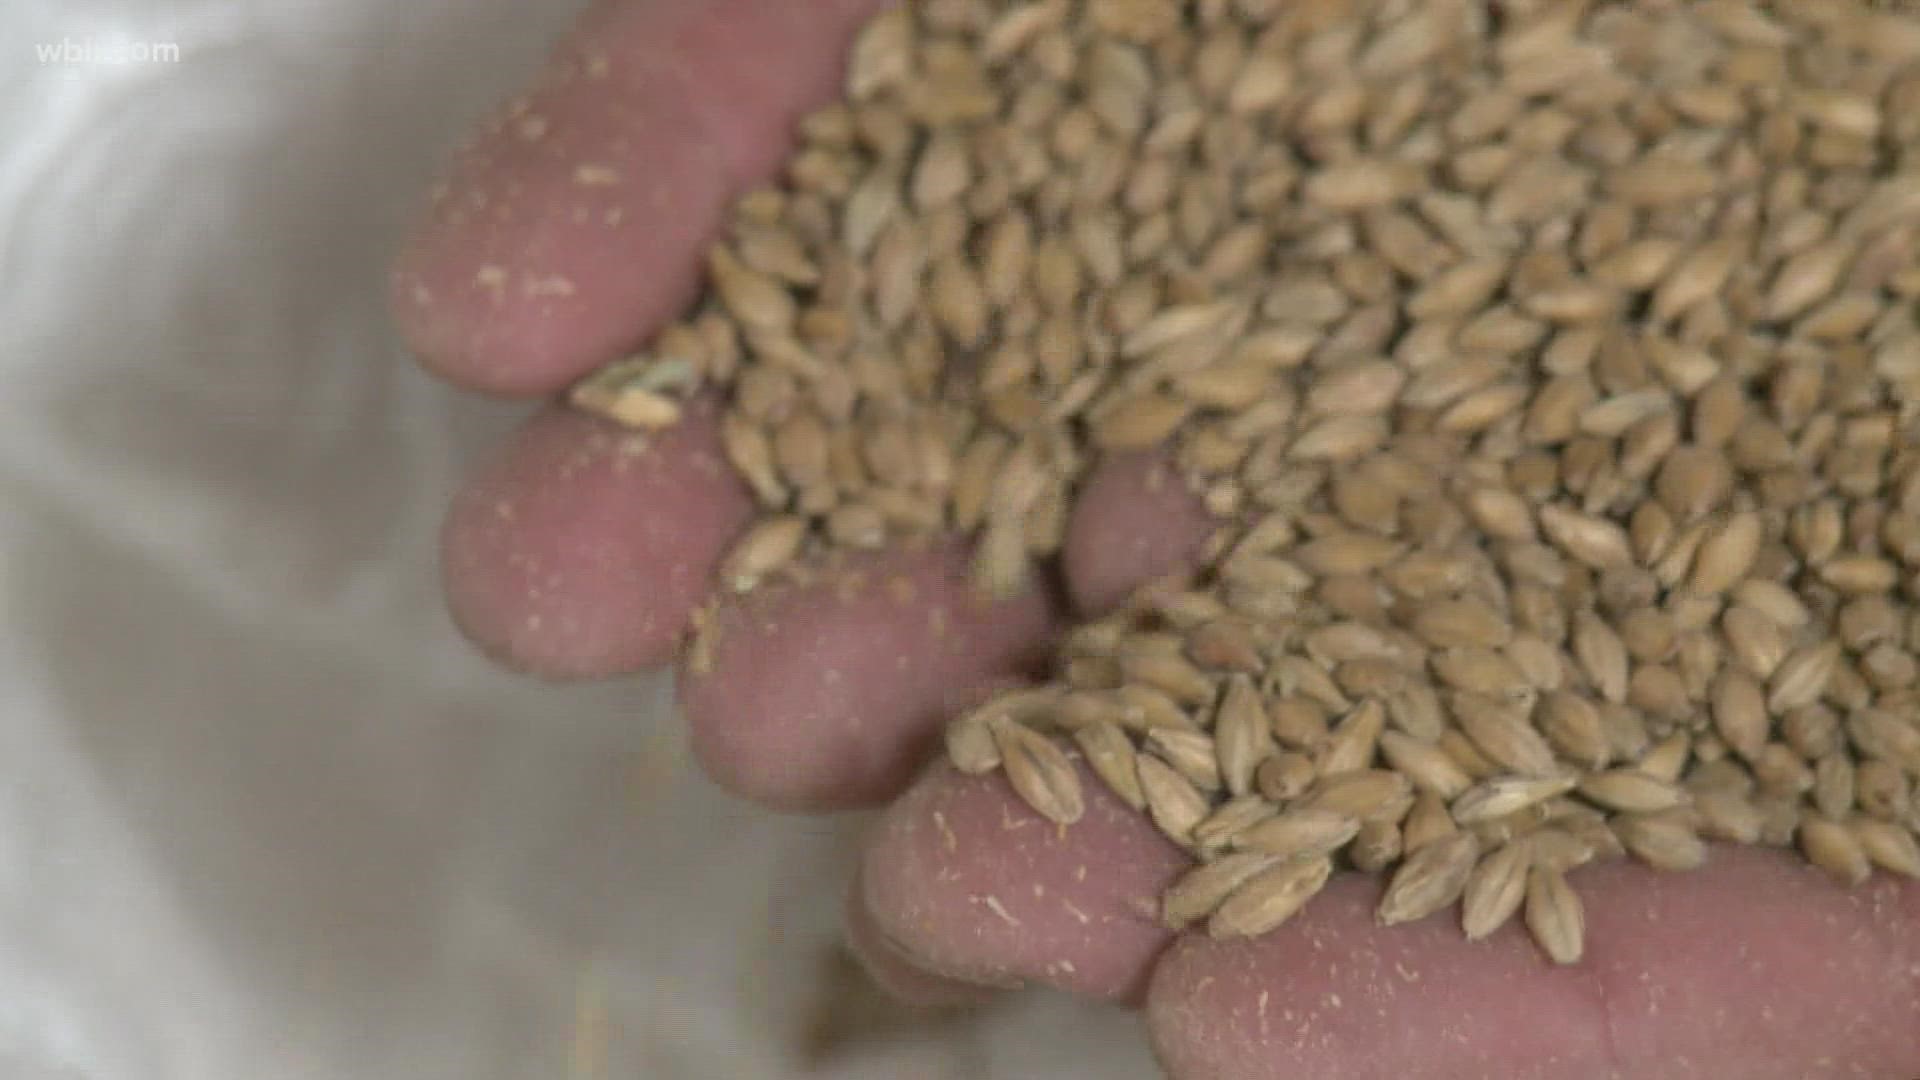 Breweries in East Tennessee said Ukraine is one of the world's top five suppliers of barley. After the invasion, prices started to rise for it.